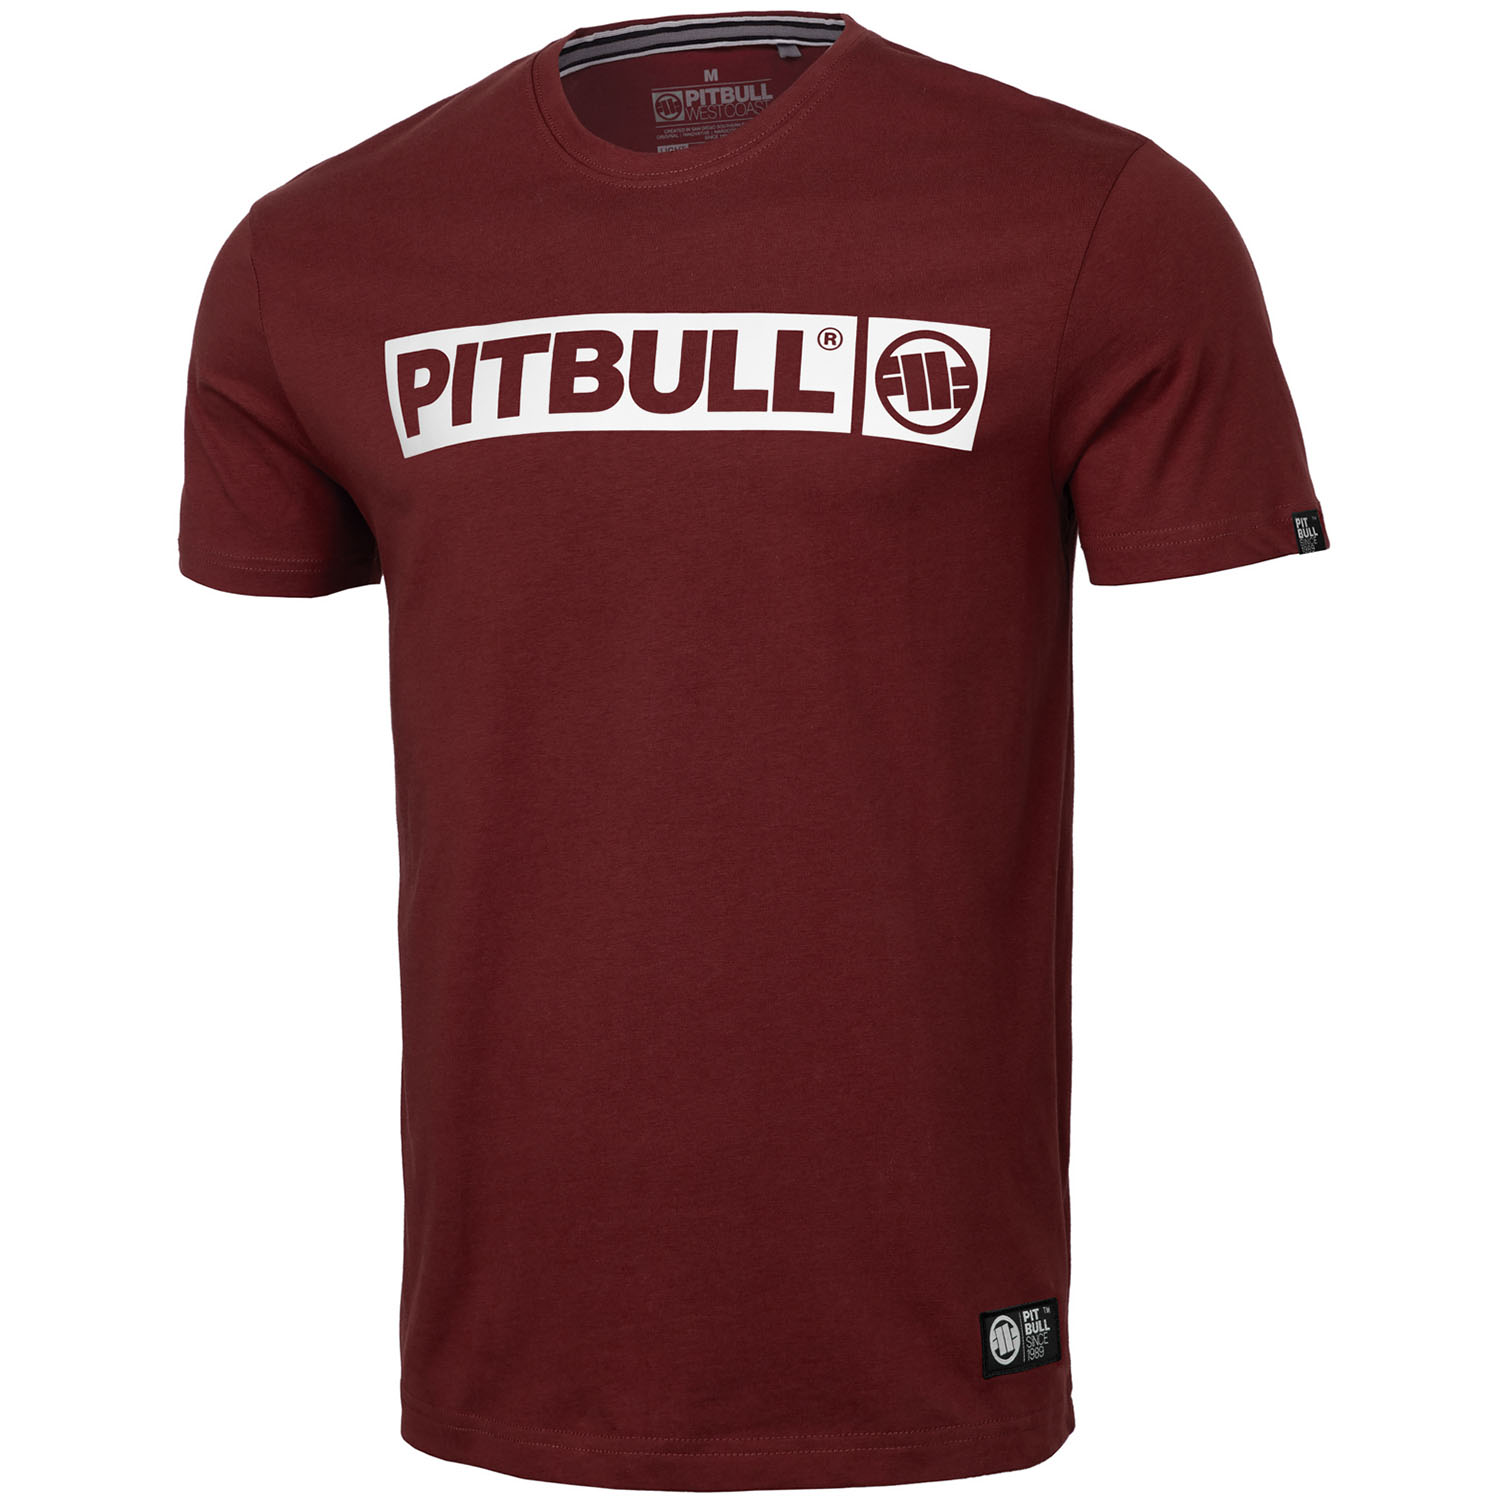 Pit Bull West Coast T-Shirt, Hilltop S70, wine red